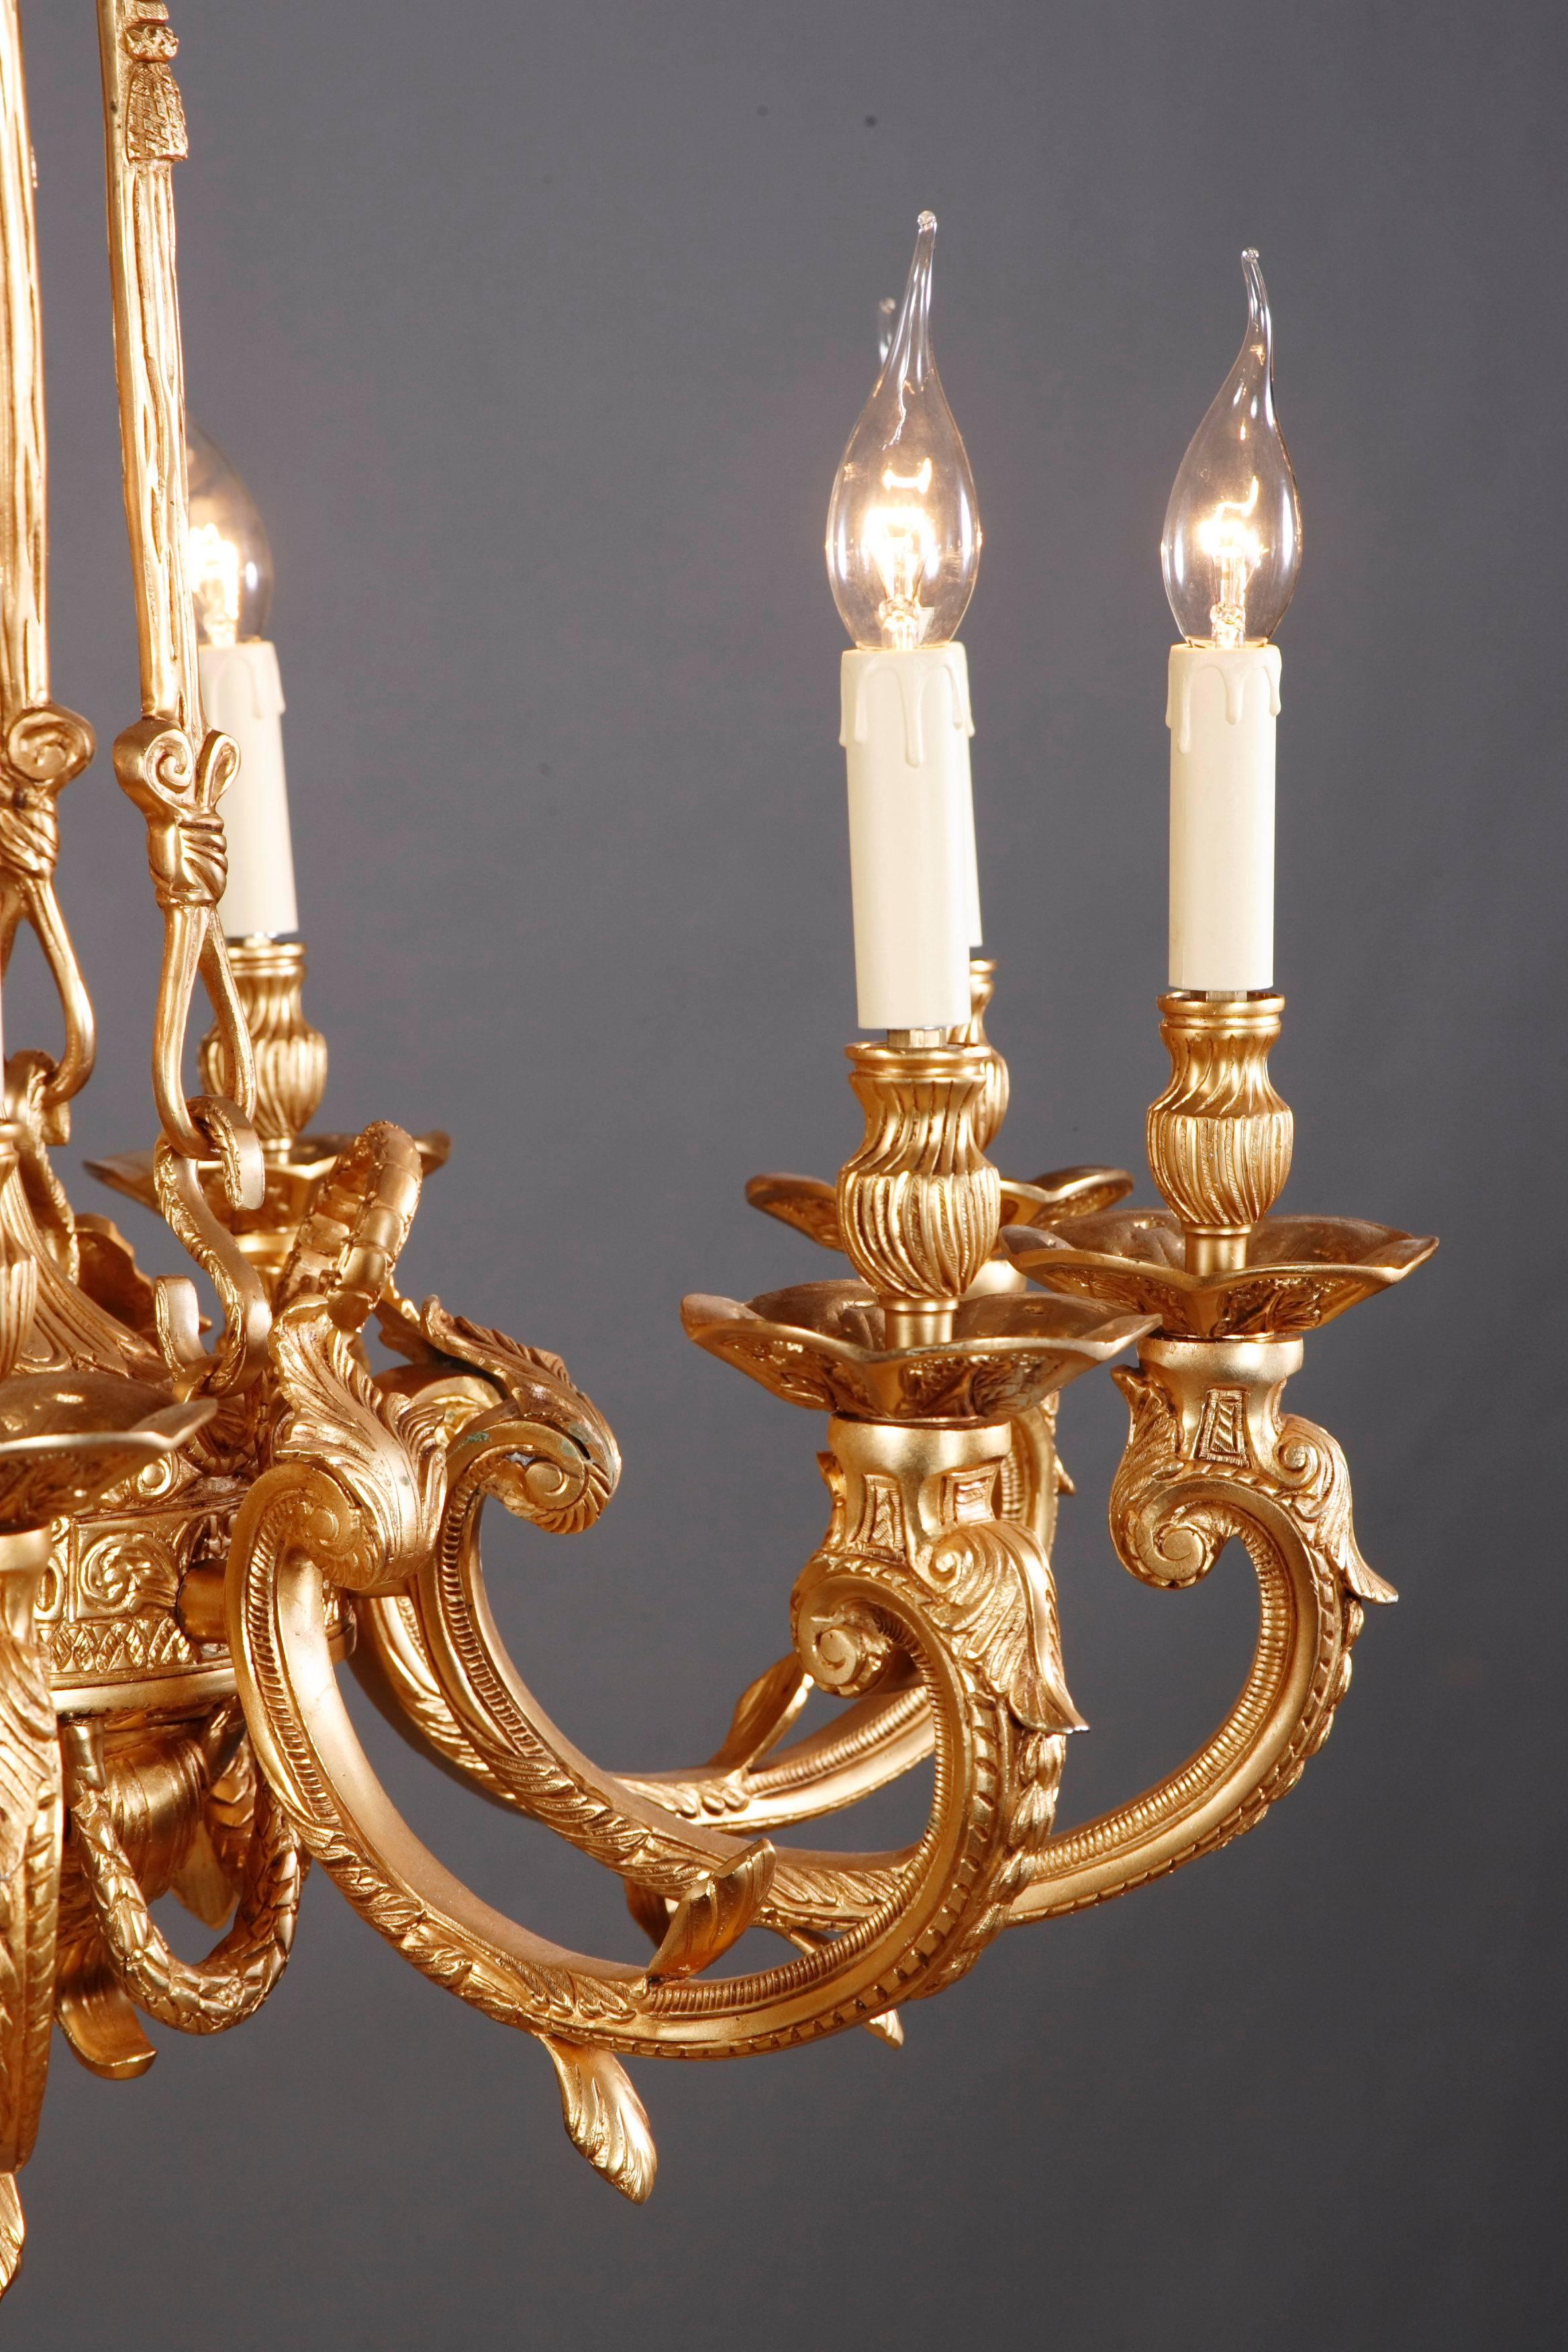 Bronzed 20th Century French Chandelier in Louis XIV Style